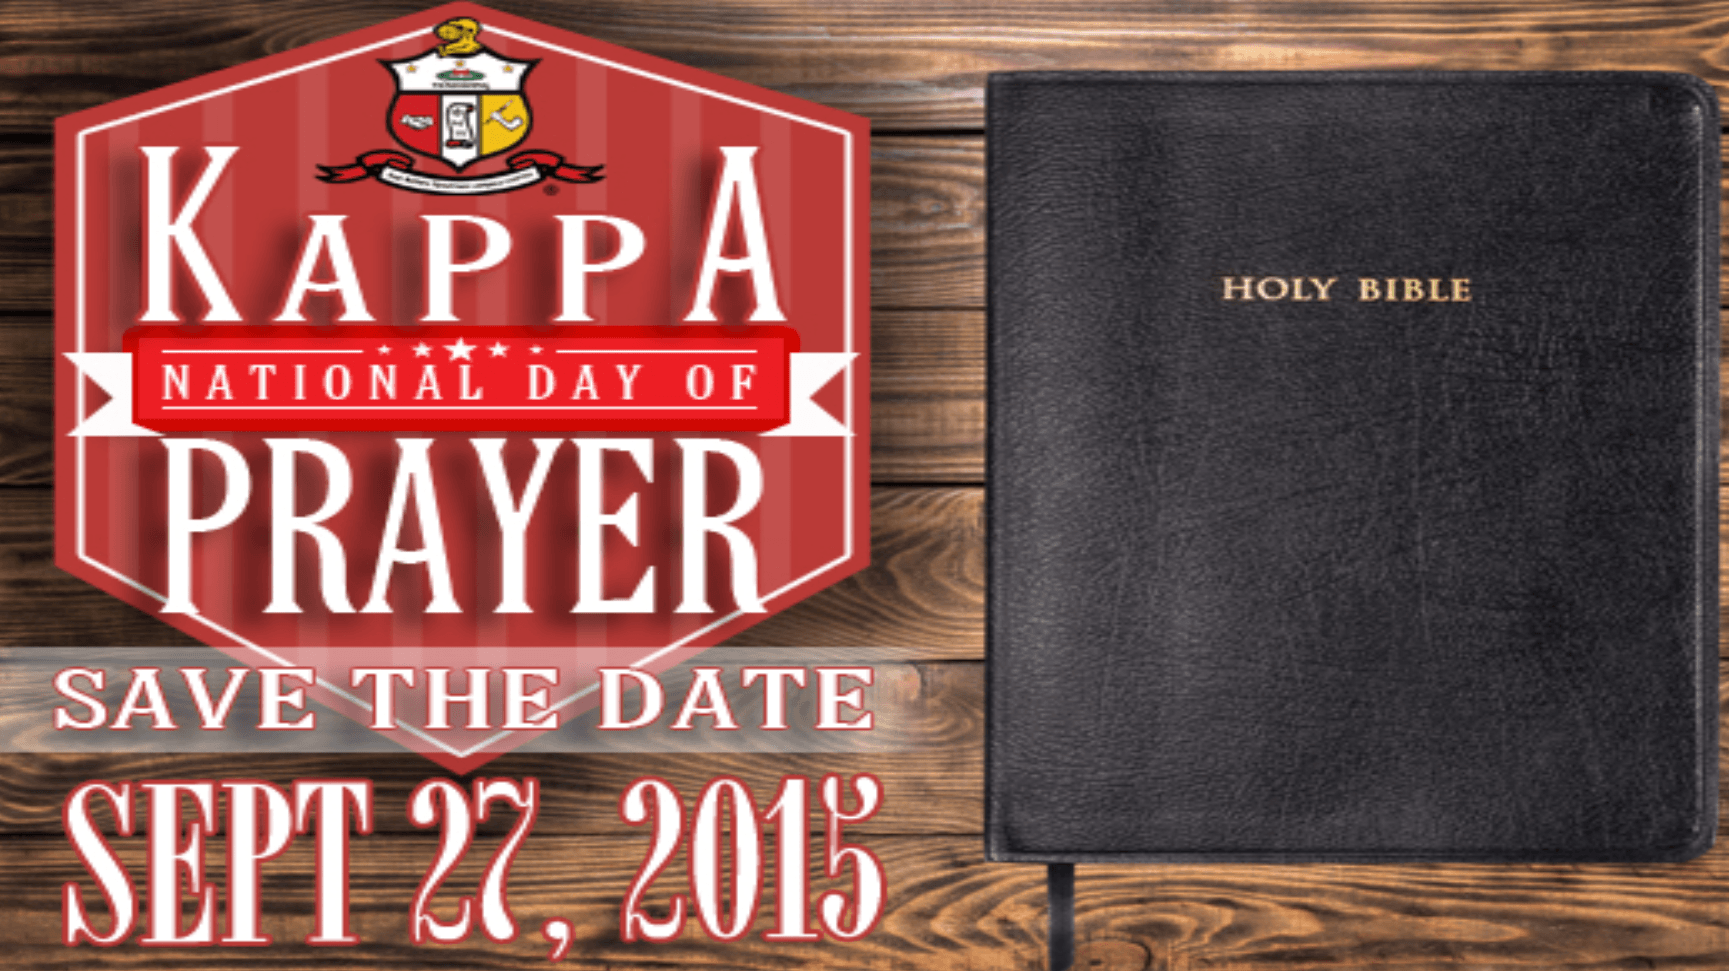 2015 National Day of Prayer Logo - Kappa National Day of Prayer | The East Central Province of Kappa ...